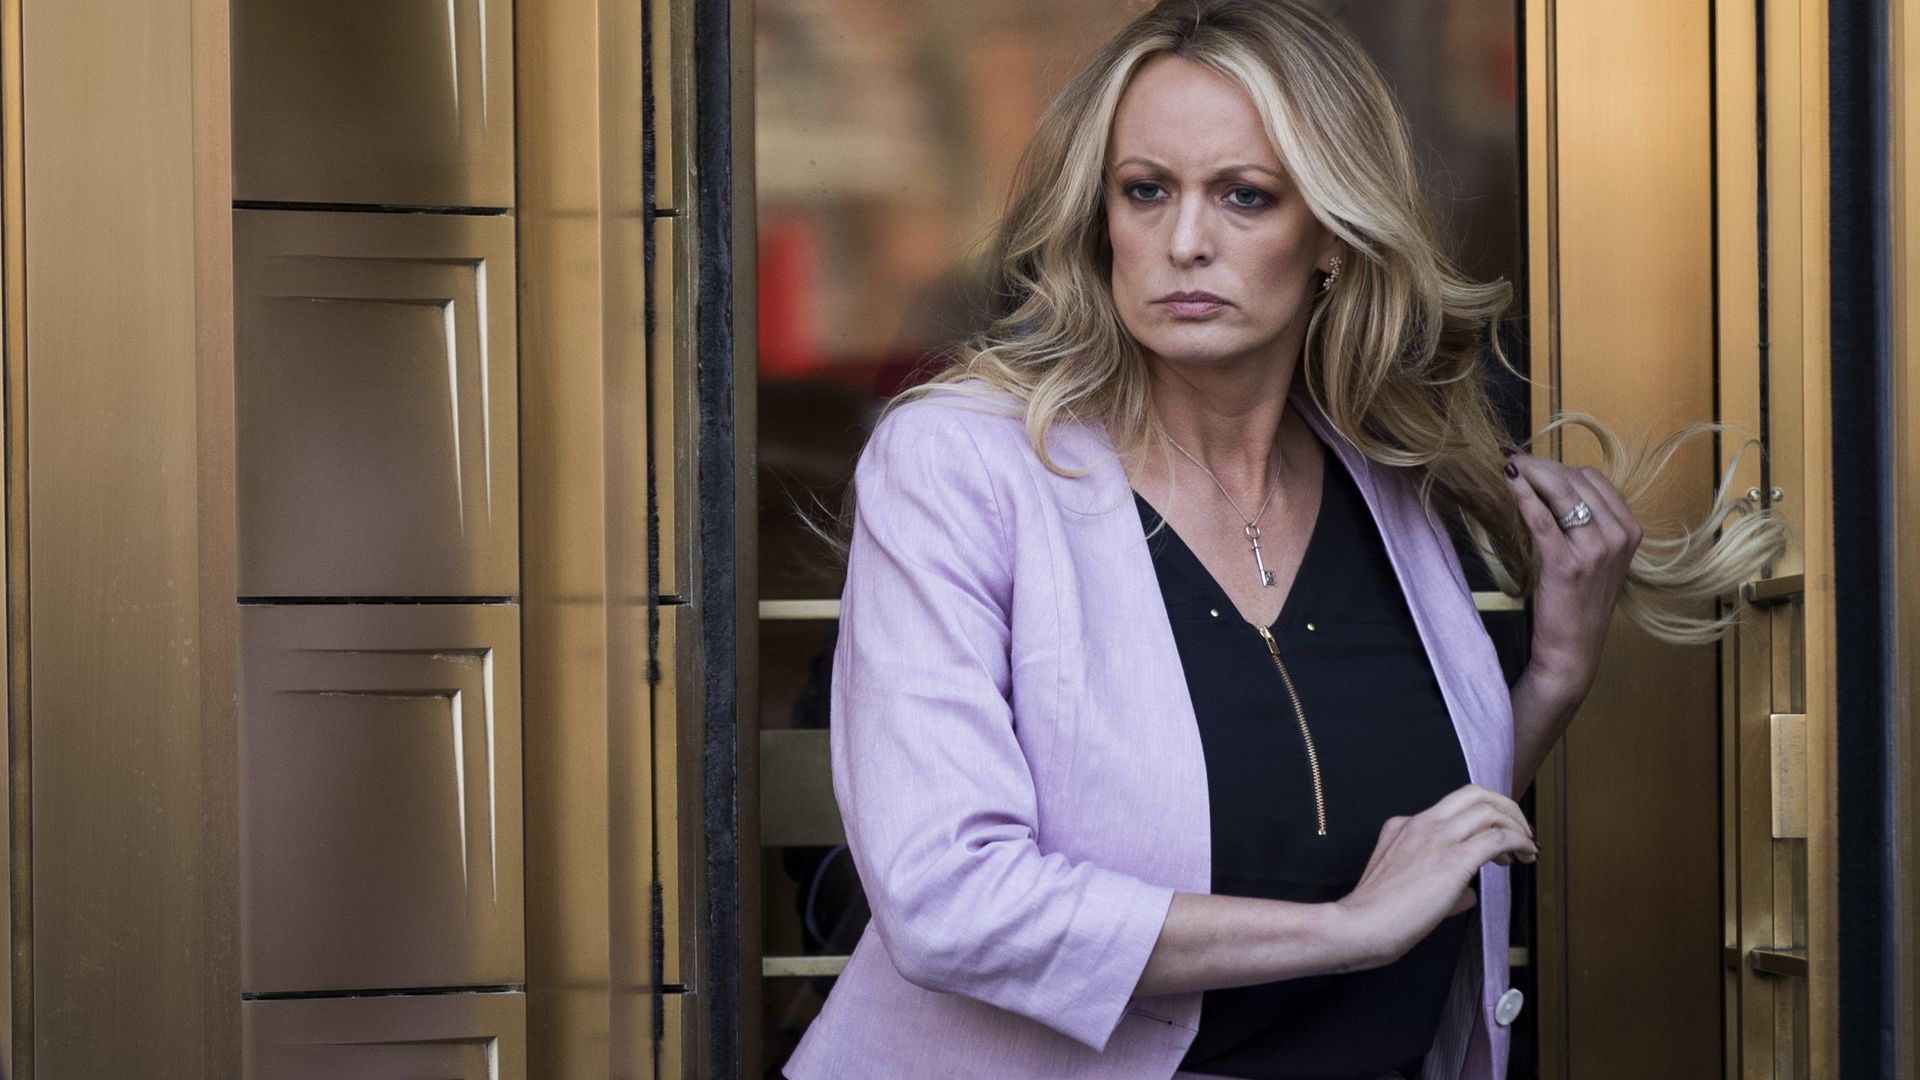 Adult film actress Stormy Daniels in New York City in April 2018. Photo: Drew Angerer/Getty Images